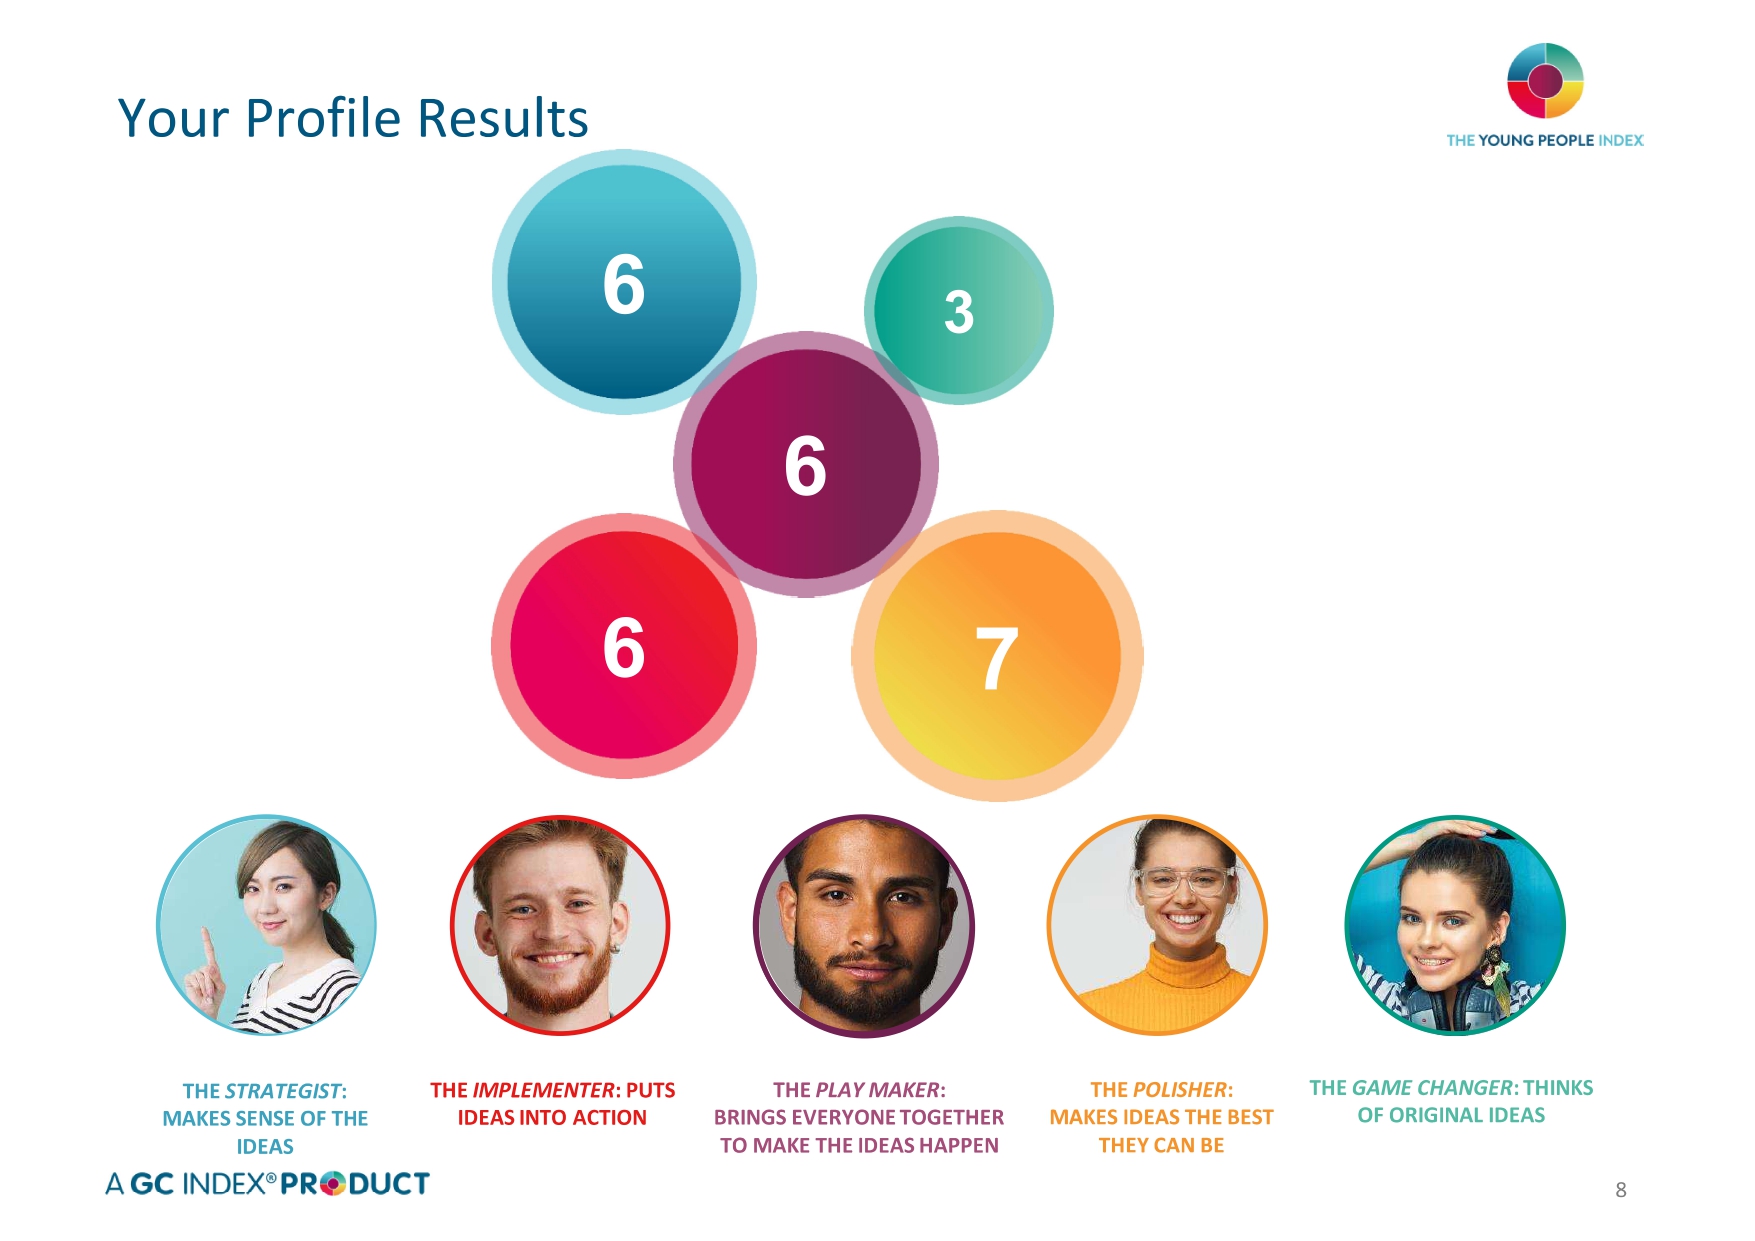 Young People Index example profile